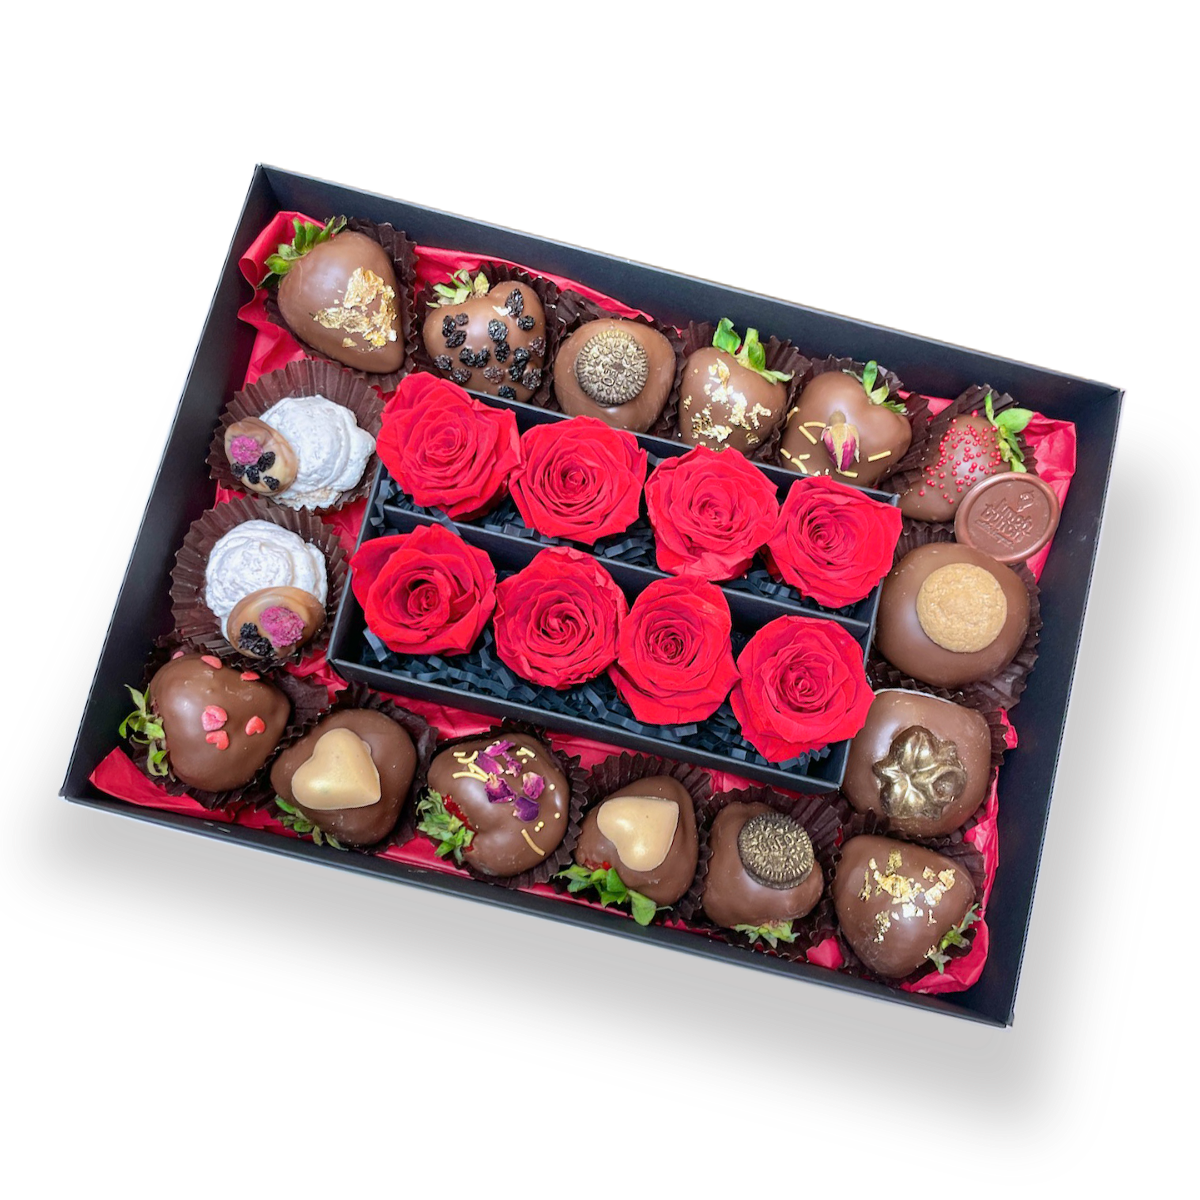 chocolate covered strawberries, chocolate covered fruit, anniversary gift delivery, corporate chocolates, birthday gift ideas for women, chocolate gifts for women, valentine's day gift basket, gift baskets for moms, gifts for boyfriends, flowers and gifts, personalized gifts for her